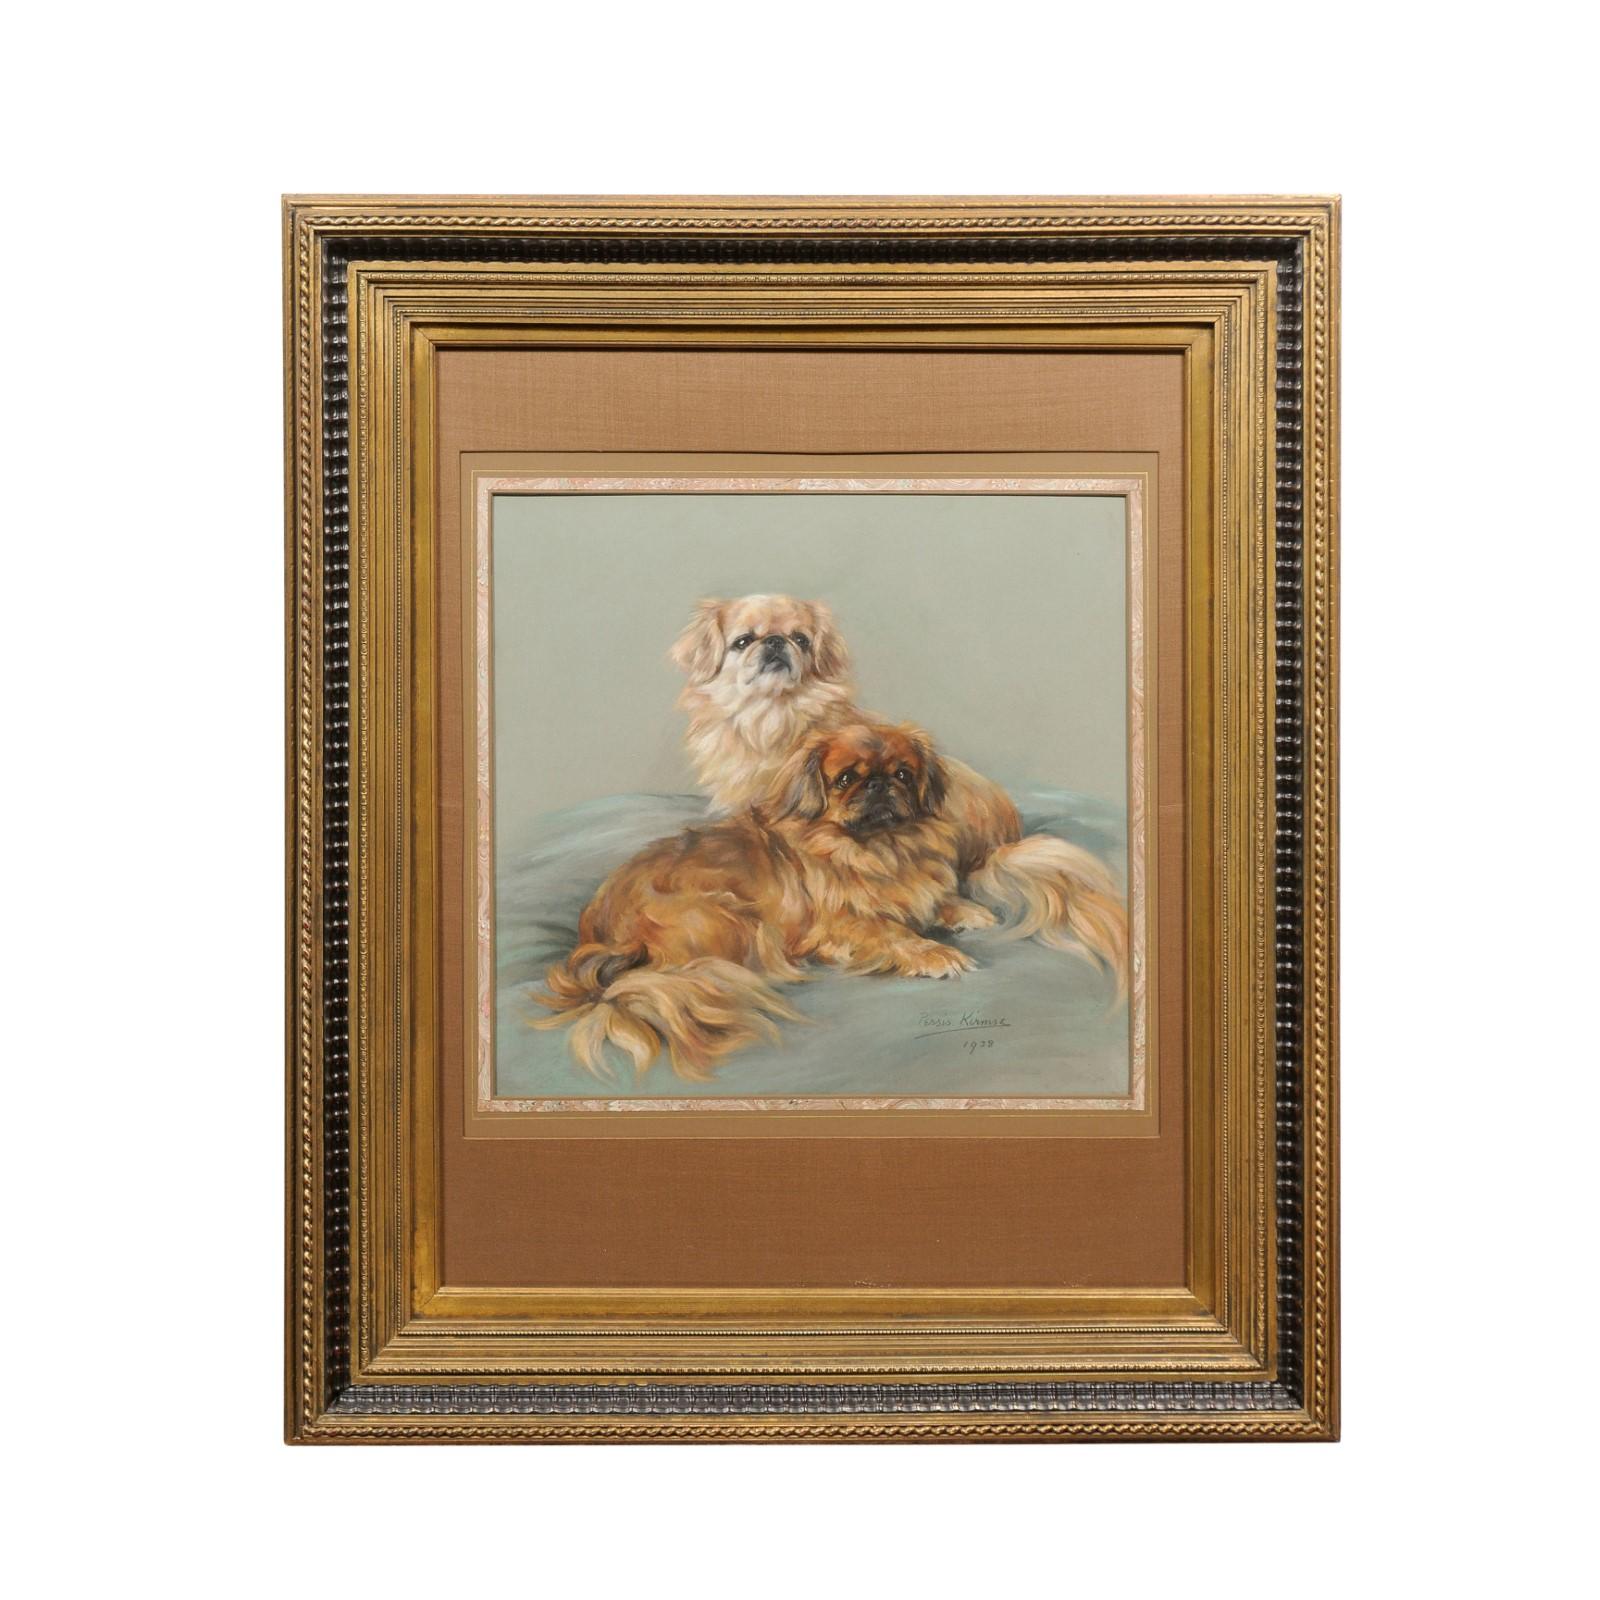  Large Framed English Pastel of 2 Pekingese Dogs, signed “Persis Kirmse”, 1938 In Good Condition For Sale In Atlanta, GA